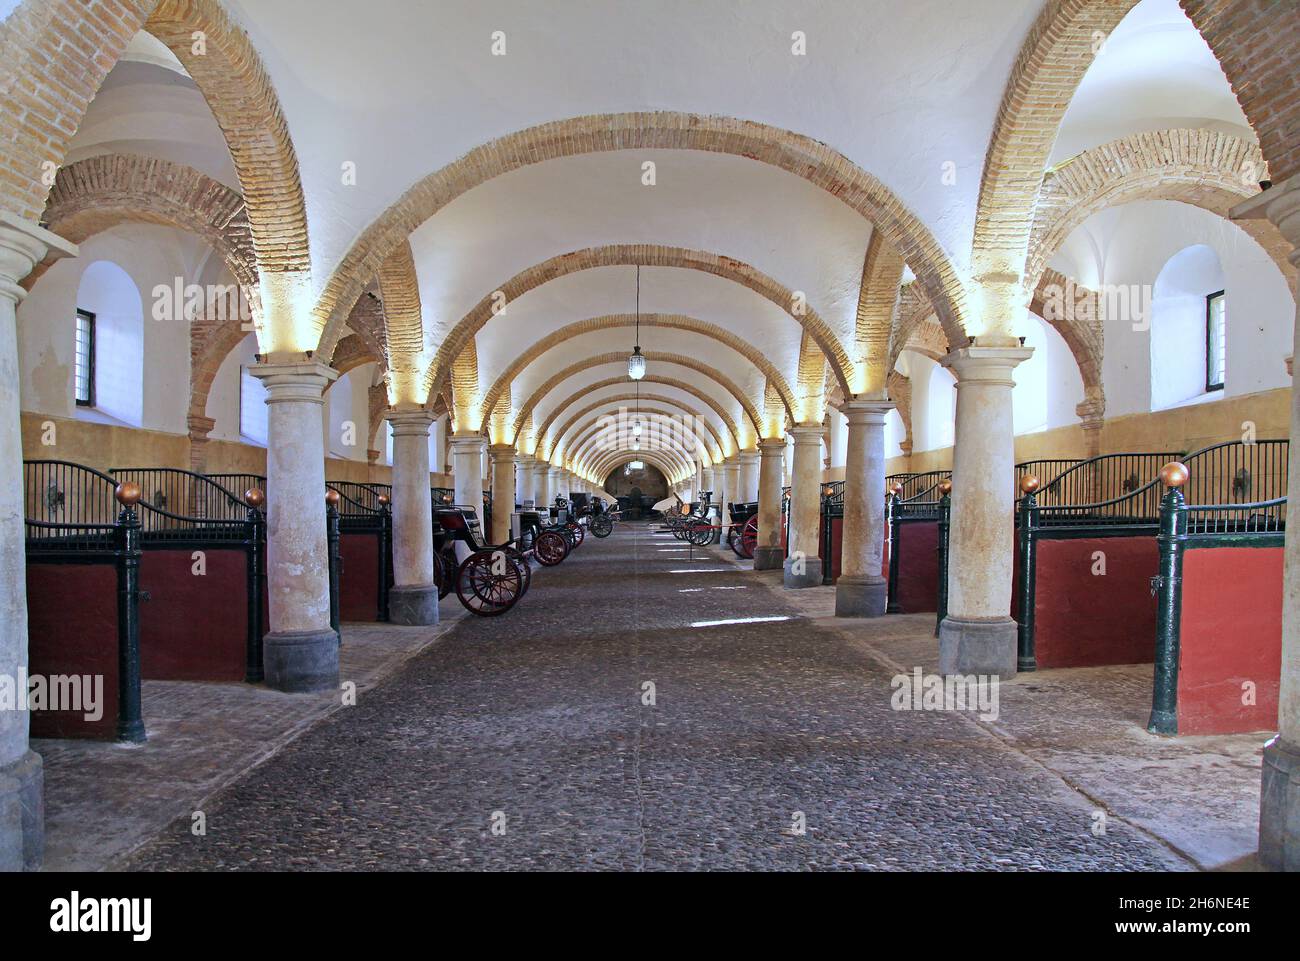 Royal Stables;Felipe II, the Spanish King,founded the Cordoba Royal Stables in 1572 'in order to breed sturdy horses for the service of the Royal House'. Cathedral of the Horse.Caballerizas Reales Stock Photo